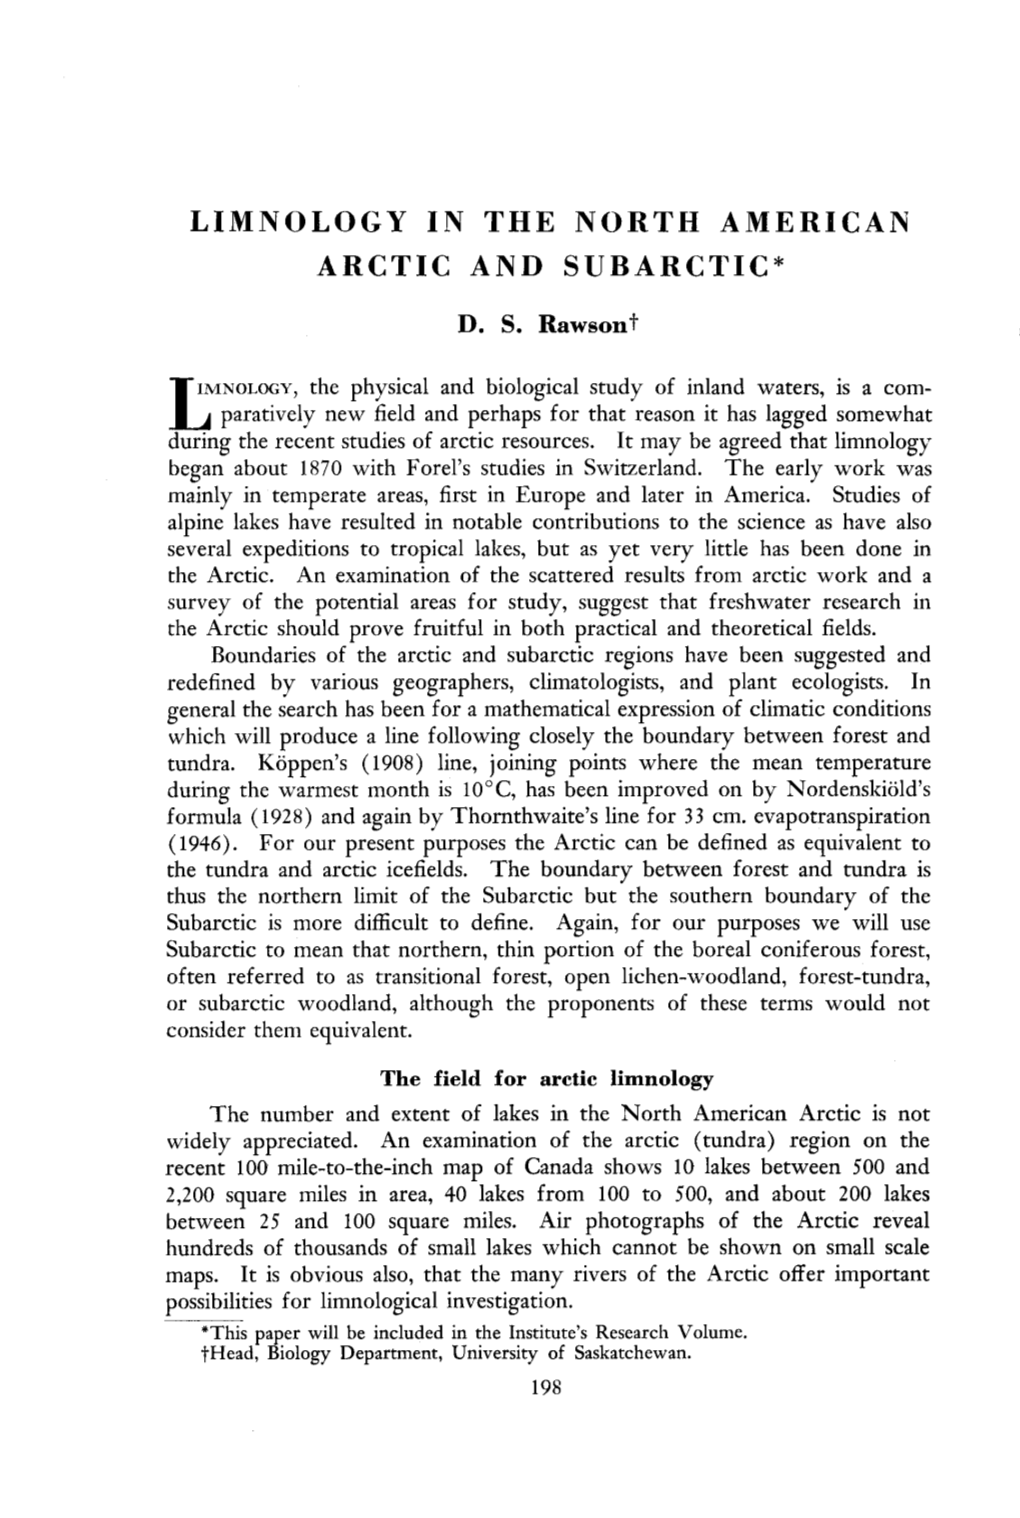 Limnology in the North American Arctic and Subarctic